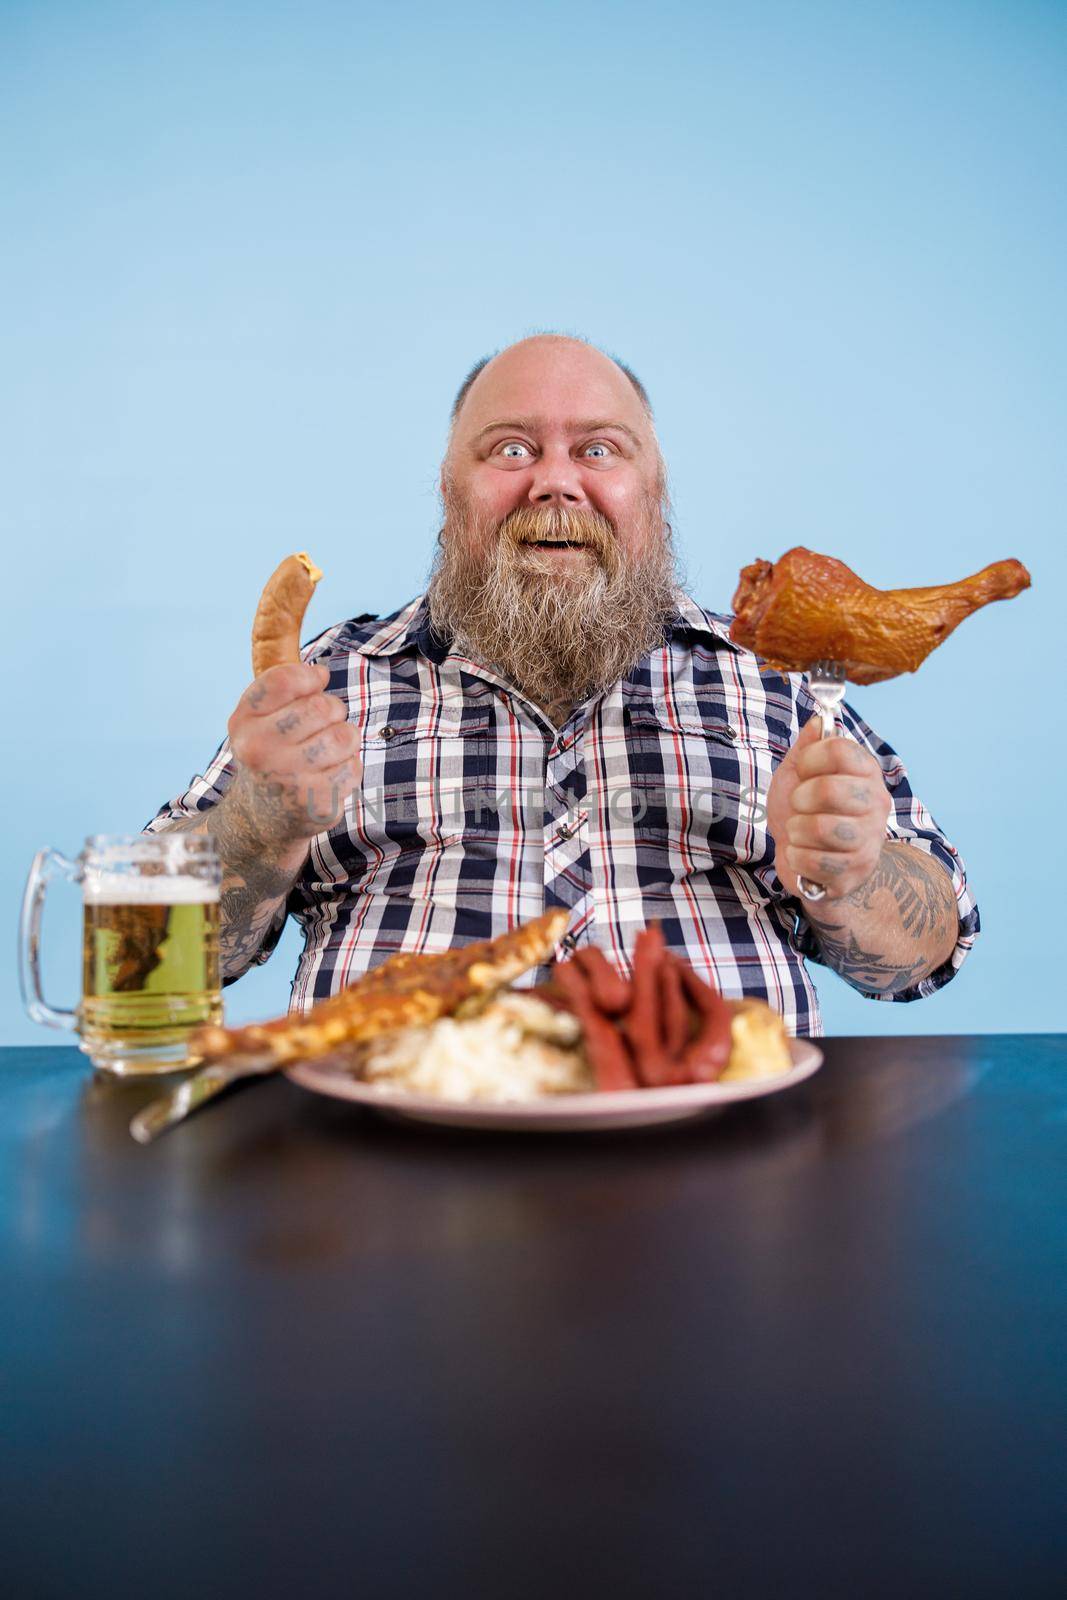 Cheerful bearded person with overweight holds smoked chicken leg and sausage at table with fat food and beer on light blue background in studio